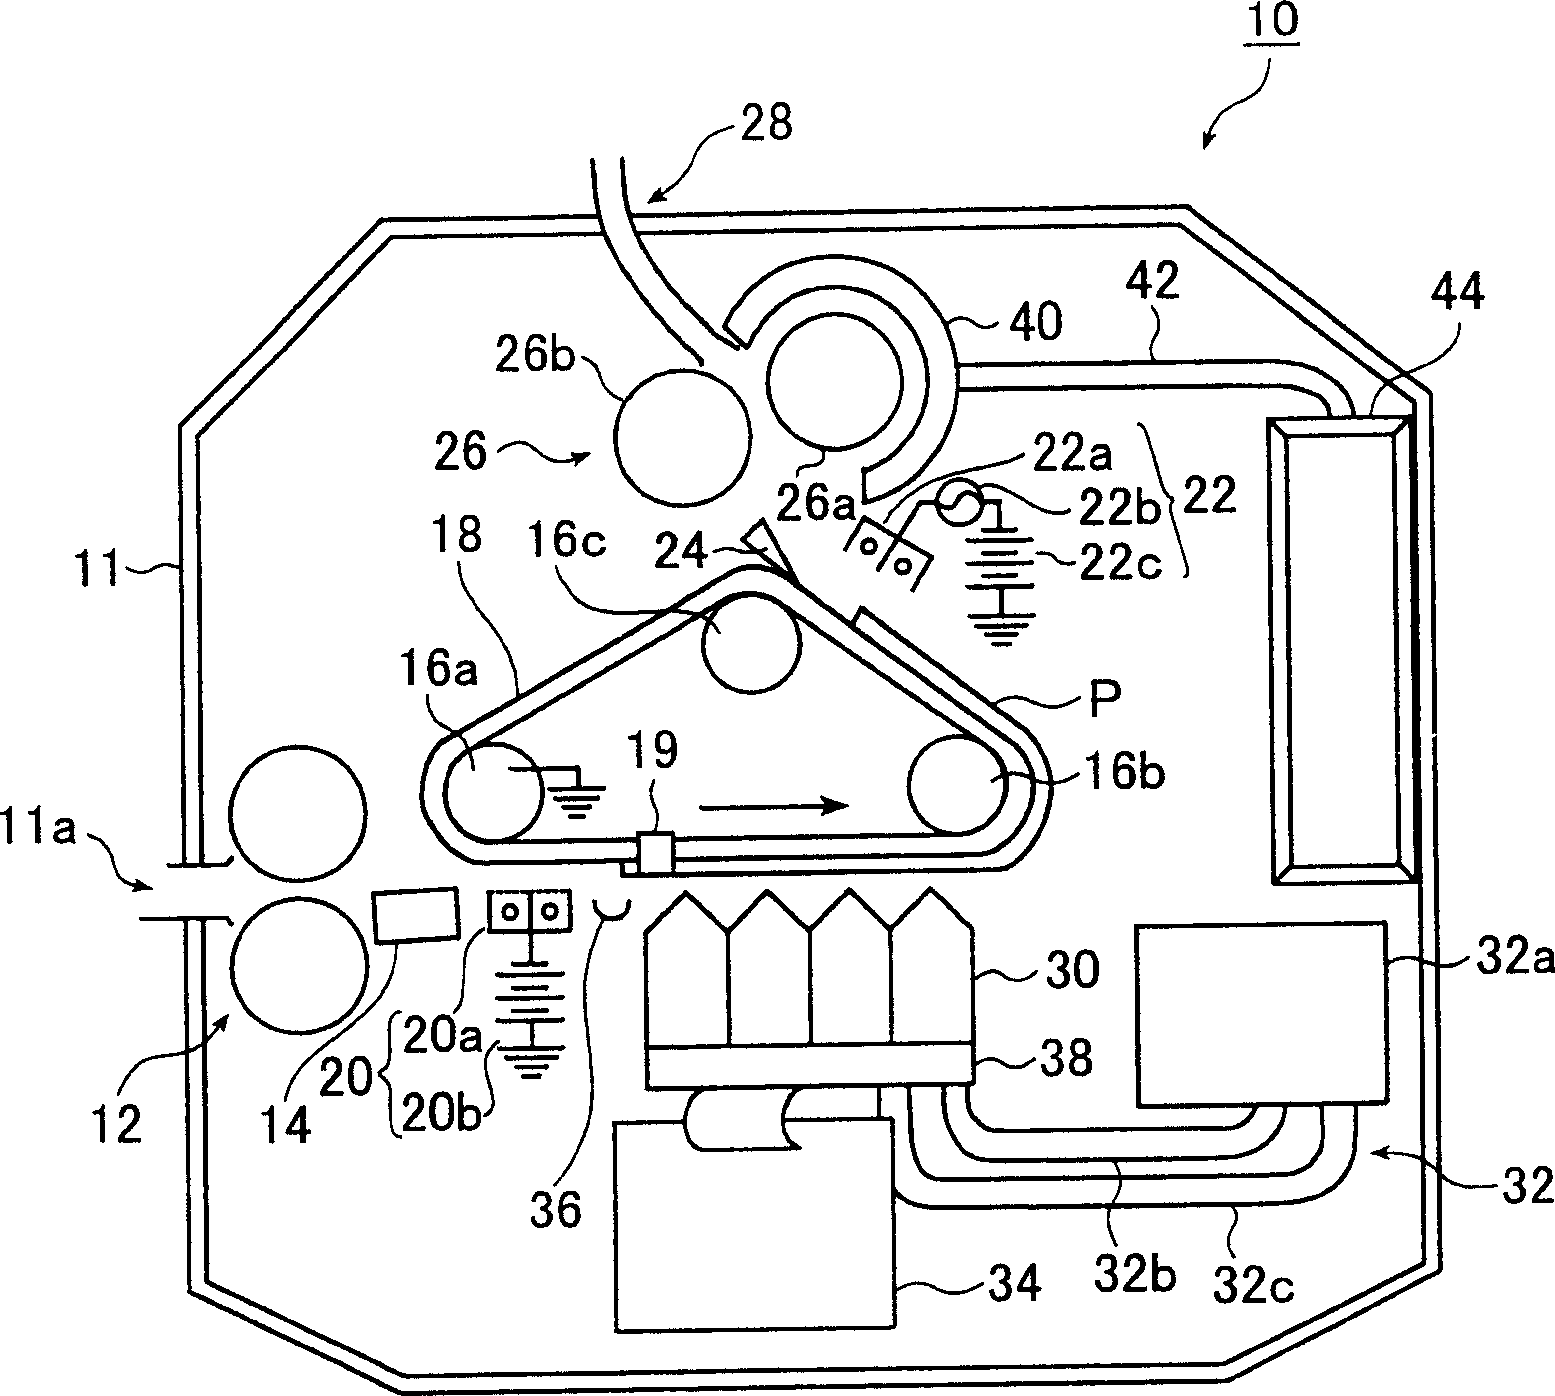 Ink jetting recording device